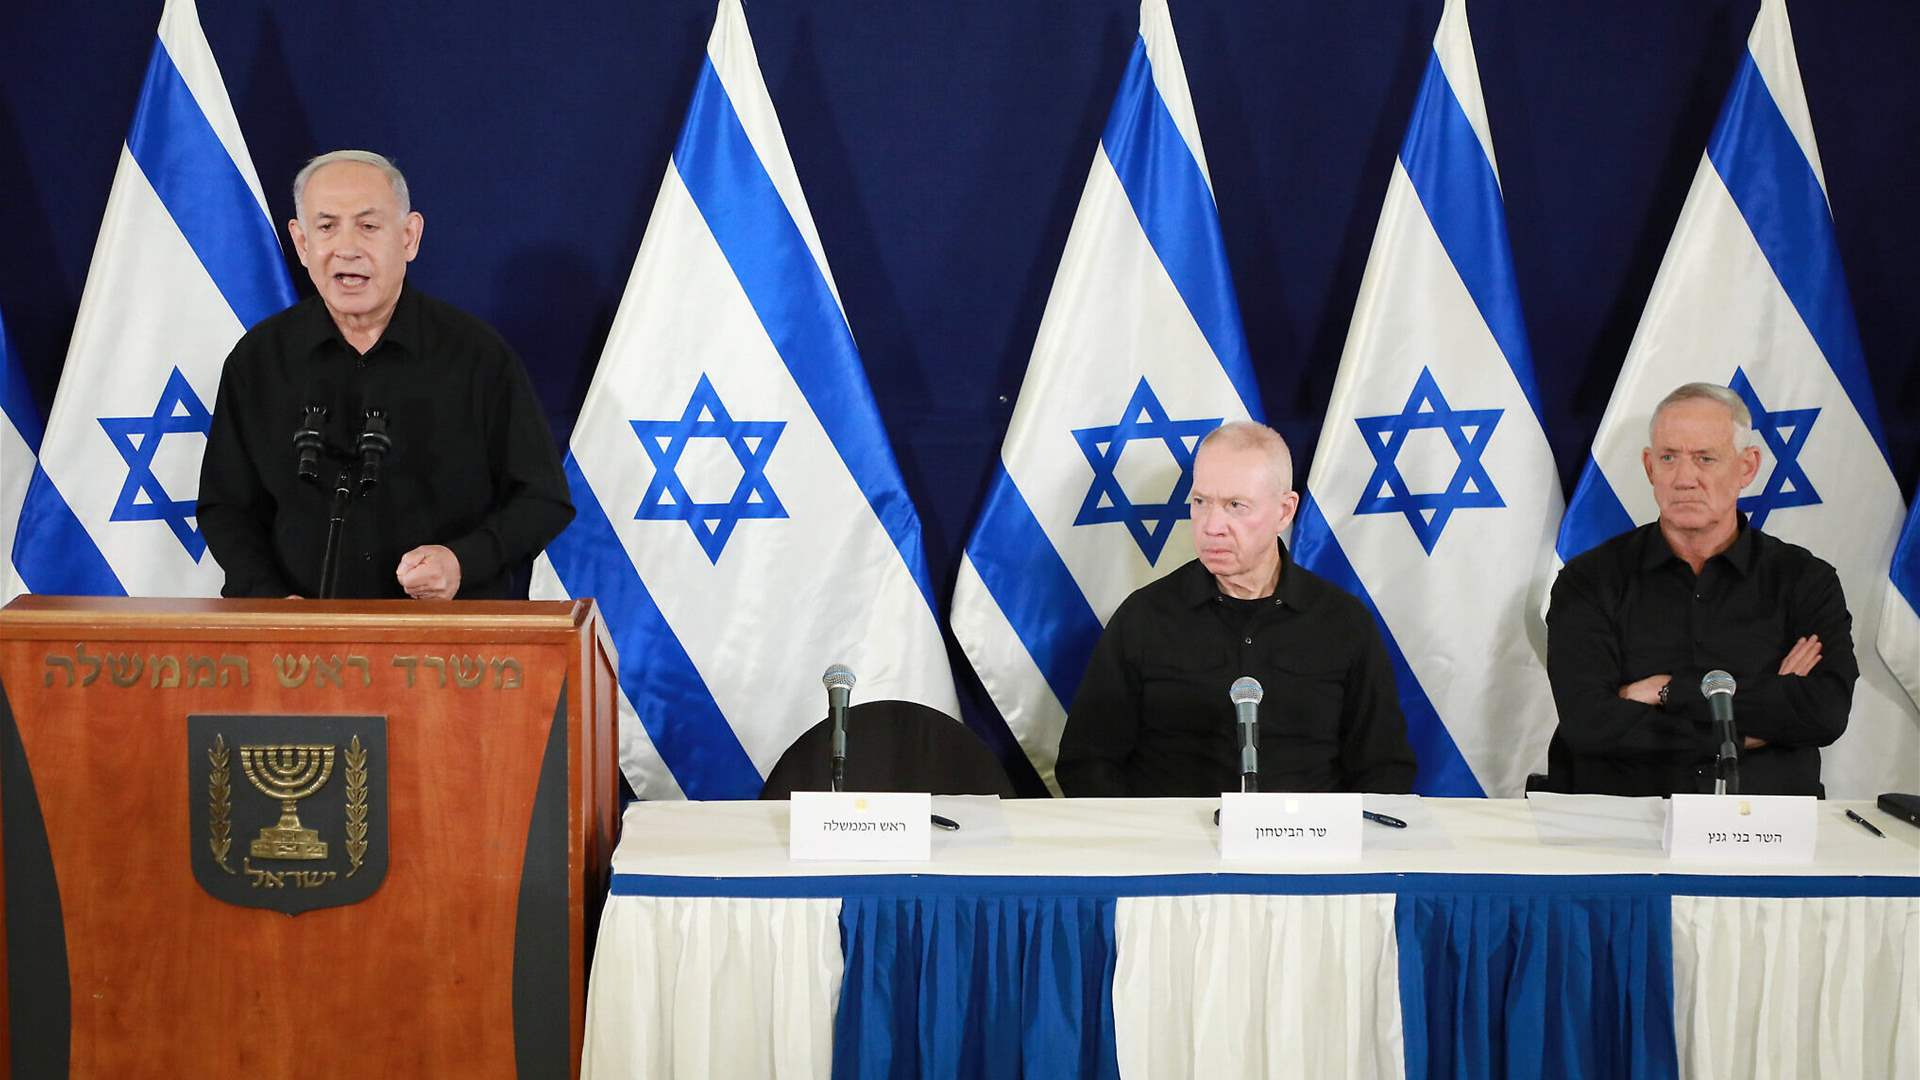 Inside Israel&#39;s War Cabinet: A rift over response to Hezbollah, hostages deal, and US role  